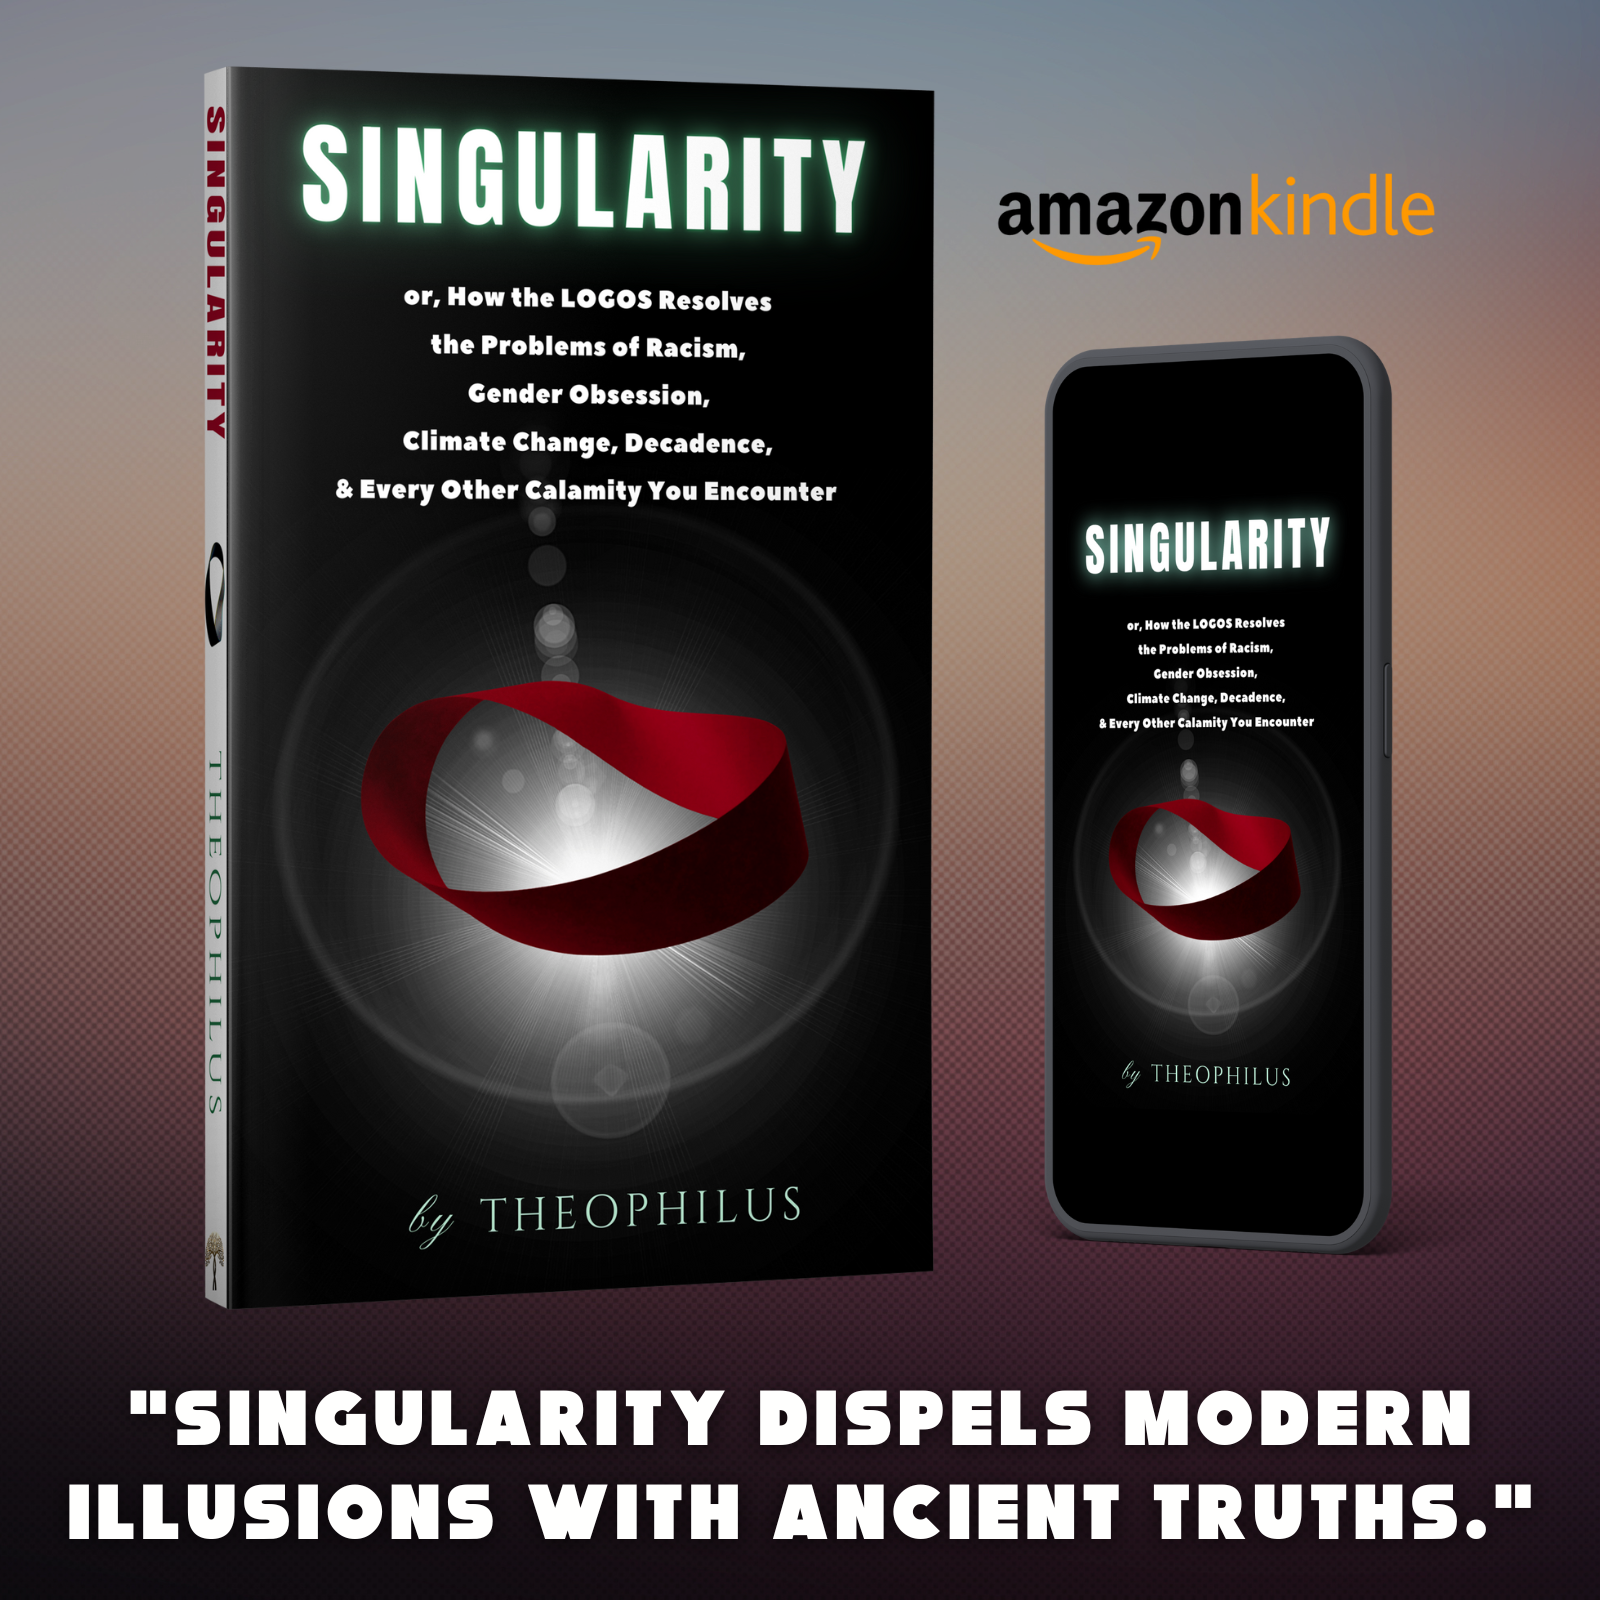 Singularity by Theophilus - click this banner to purchase on Amazon.com